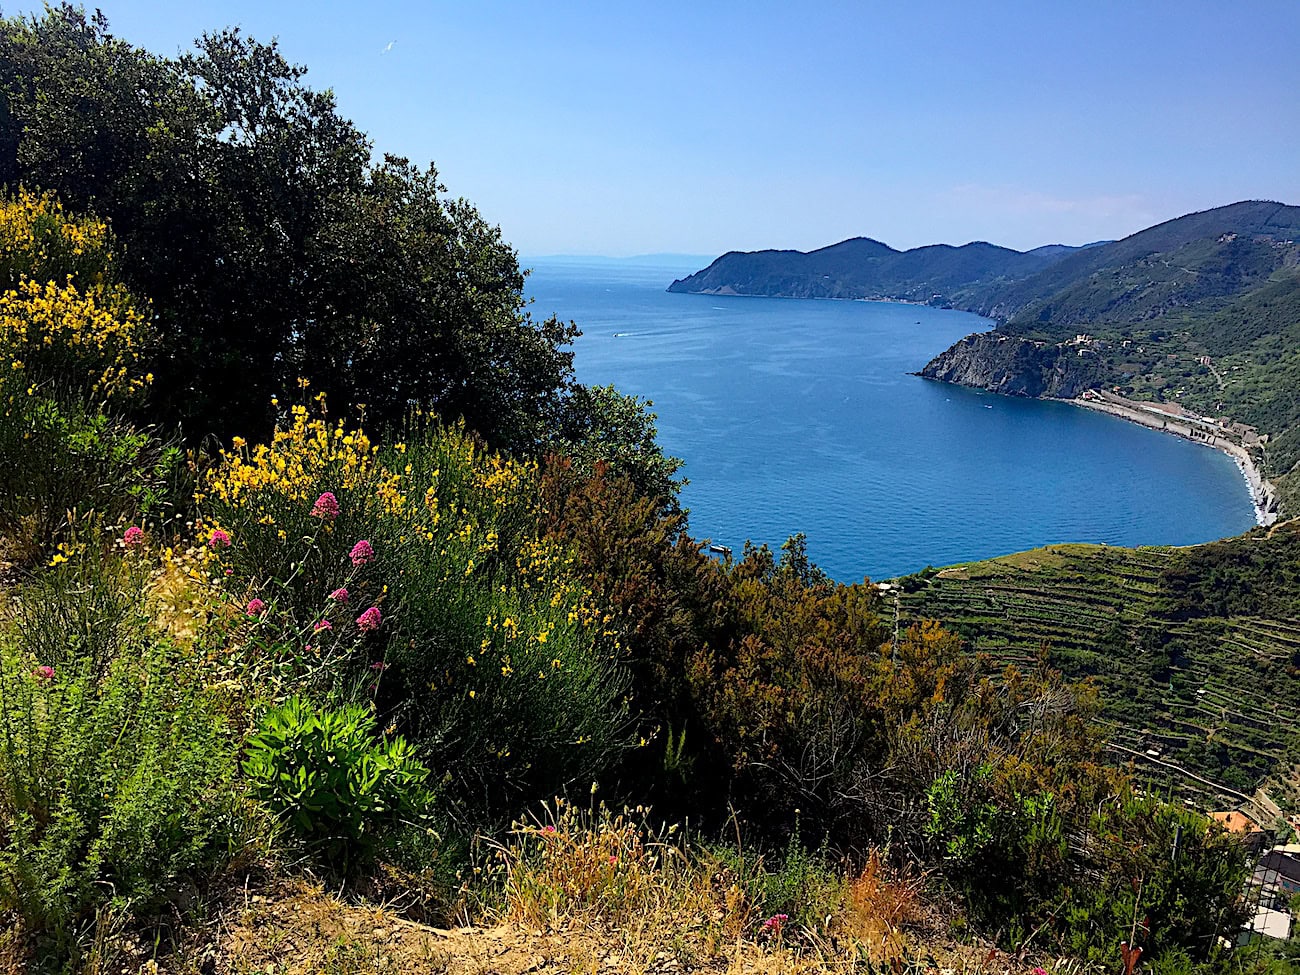 Panoramic Views during hiking in Cinque Terre